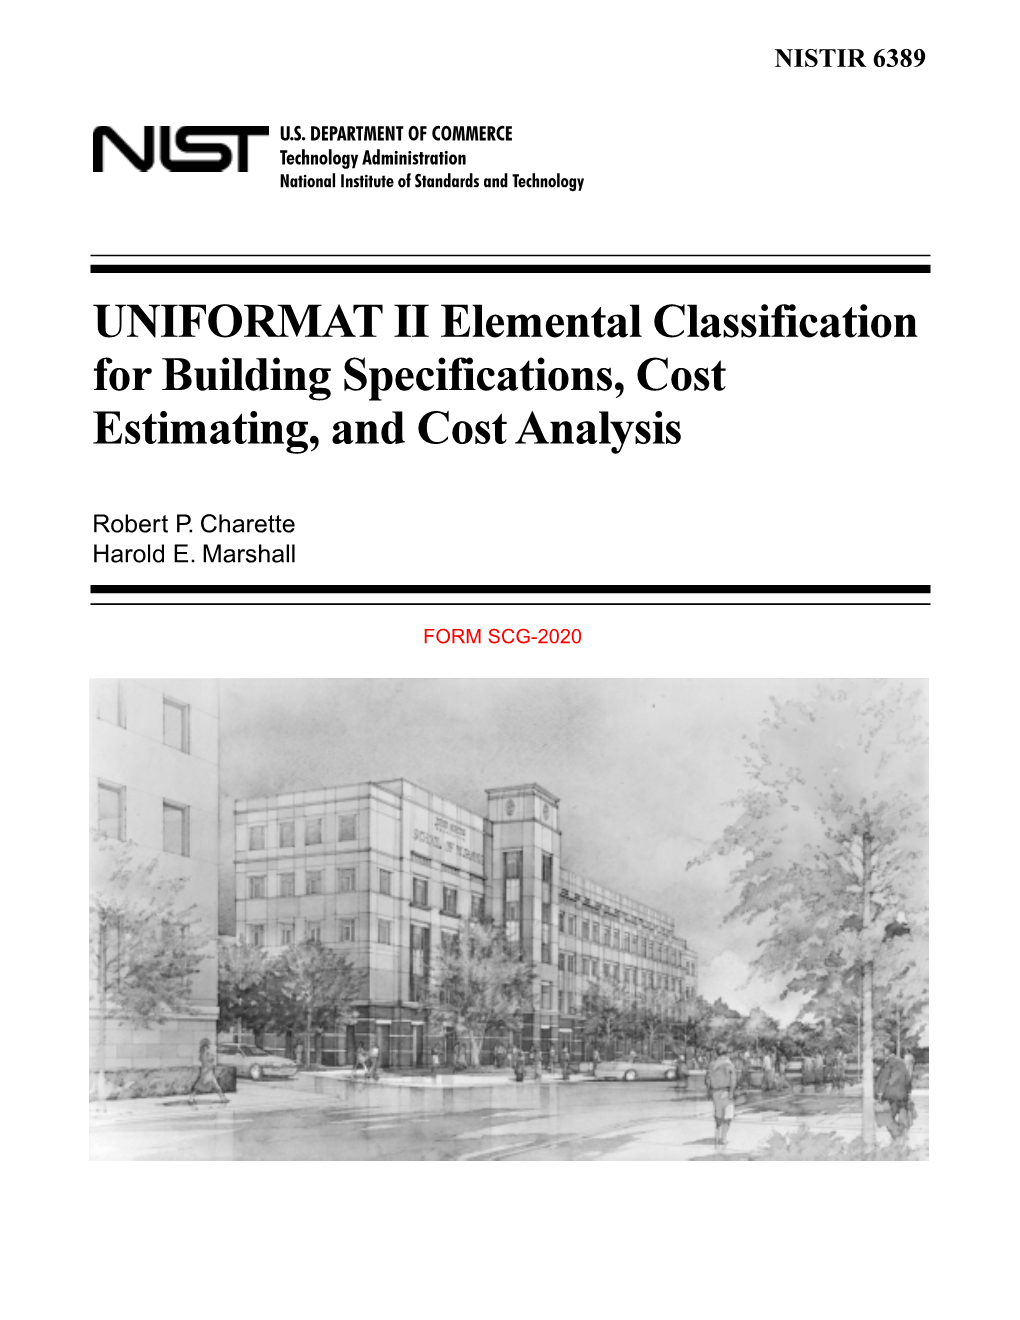 UNIFORMAT II Elemental Classification for Building Specifications, Cost Estimating, and Cost Analysis